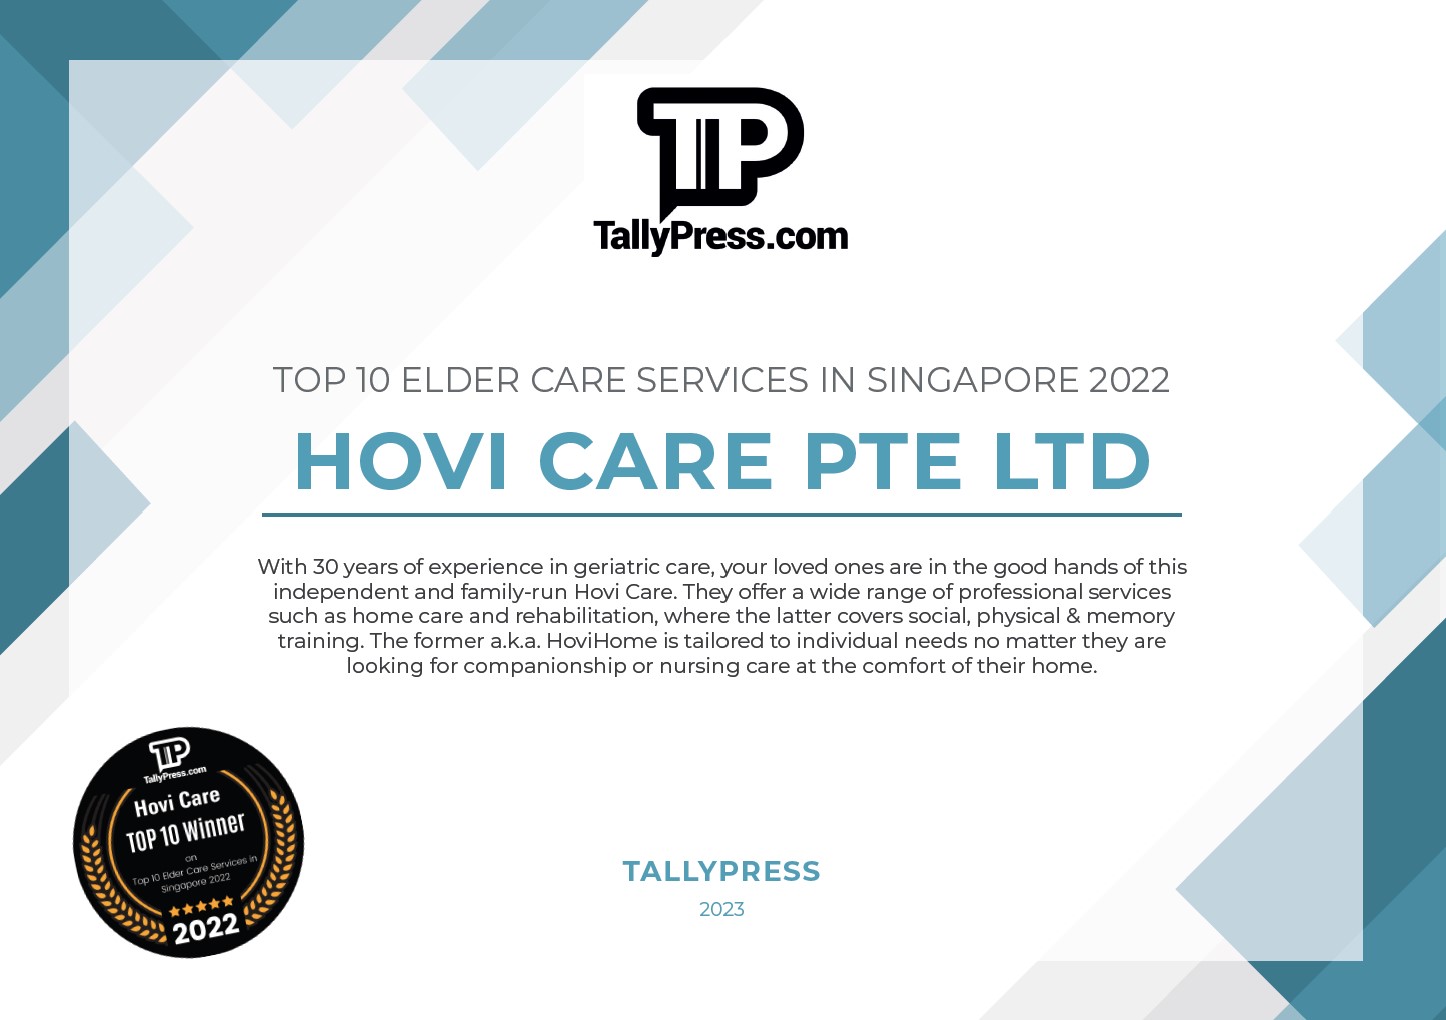 Top 10 Elder Care Services in Singapore 2022 by TallyPress